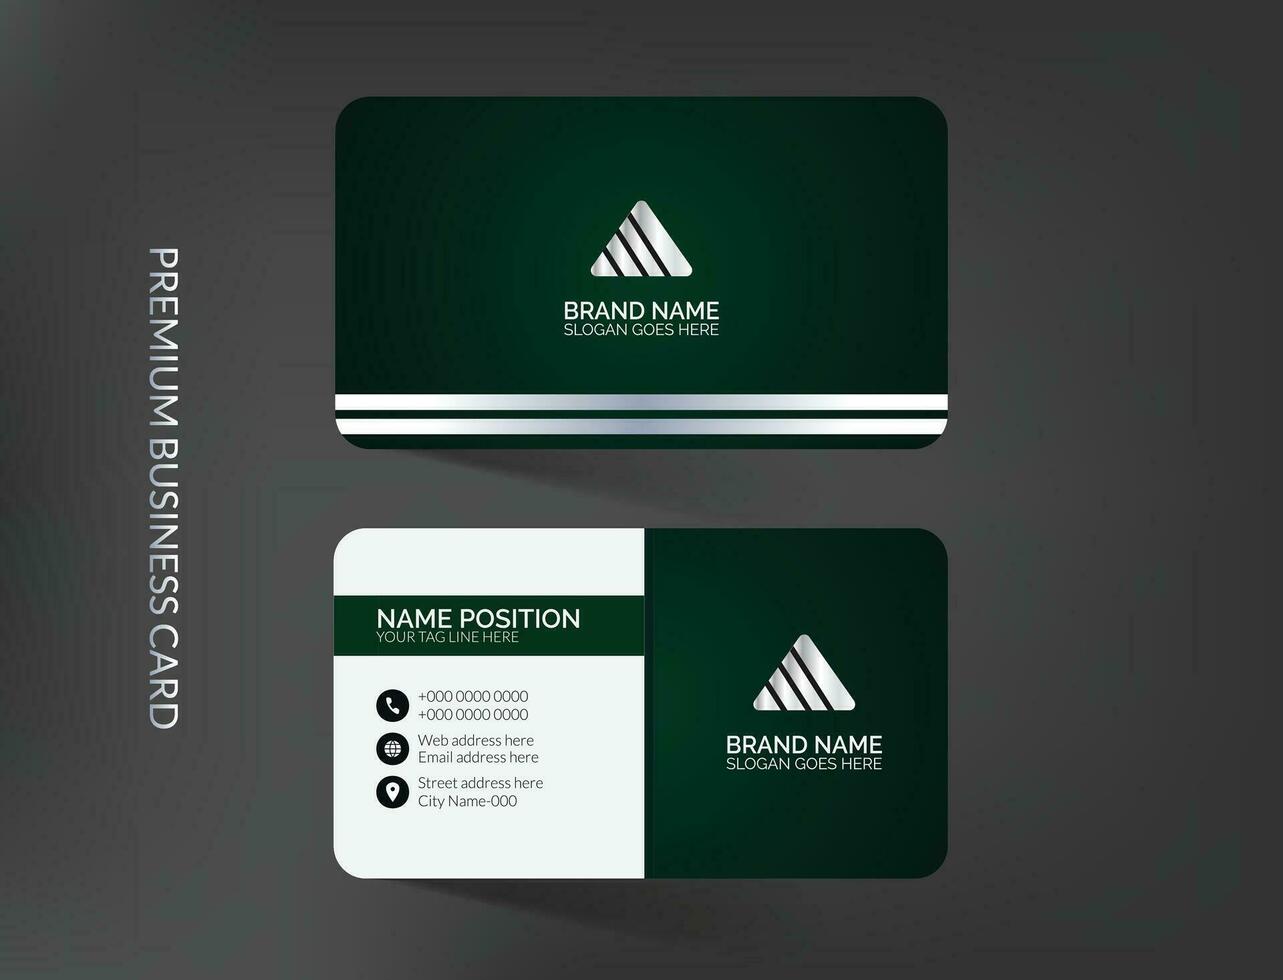 Stylish bsuiness card template design vector